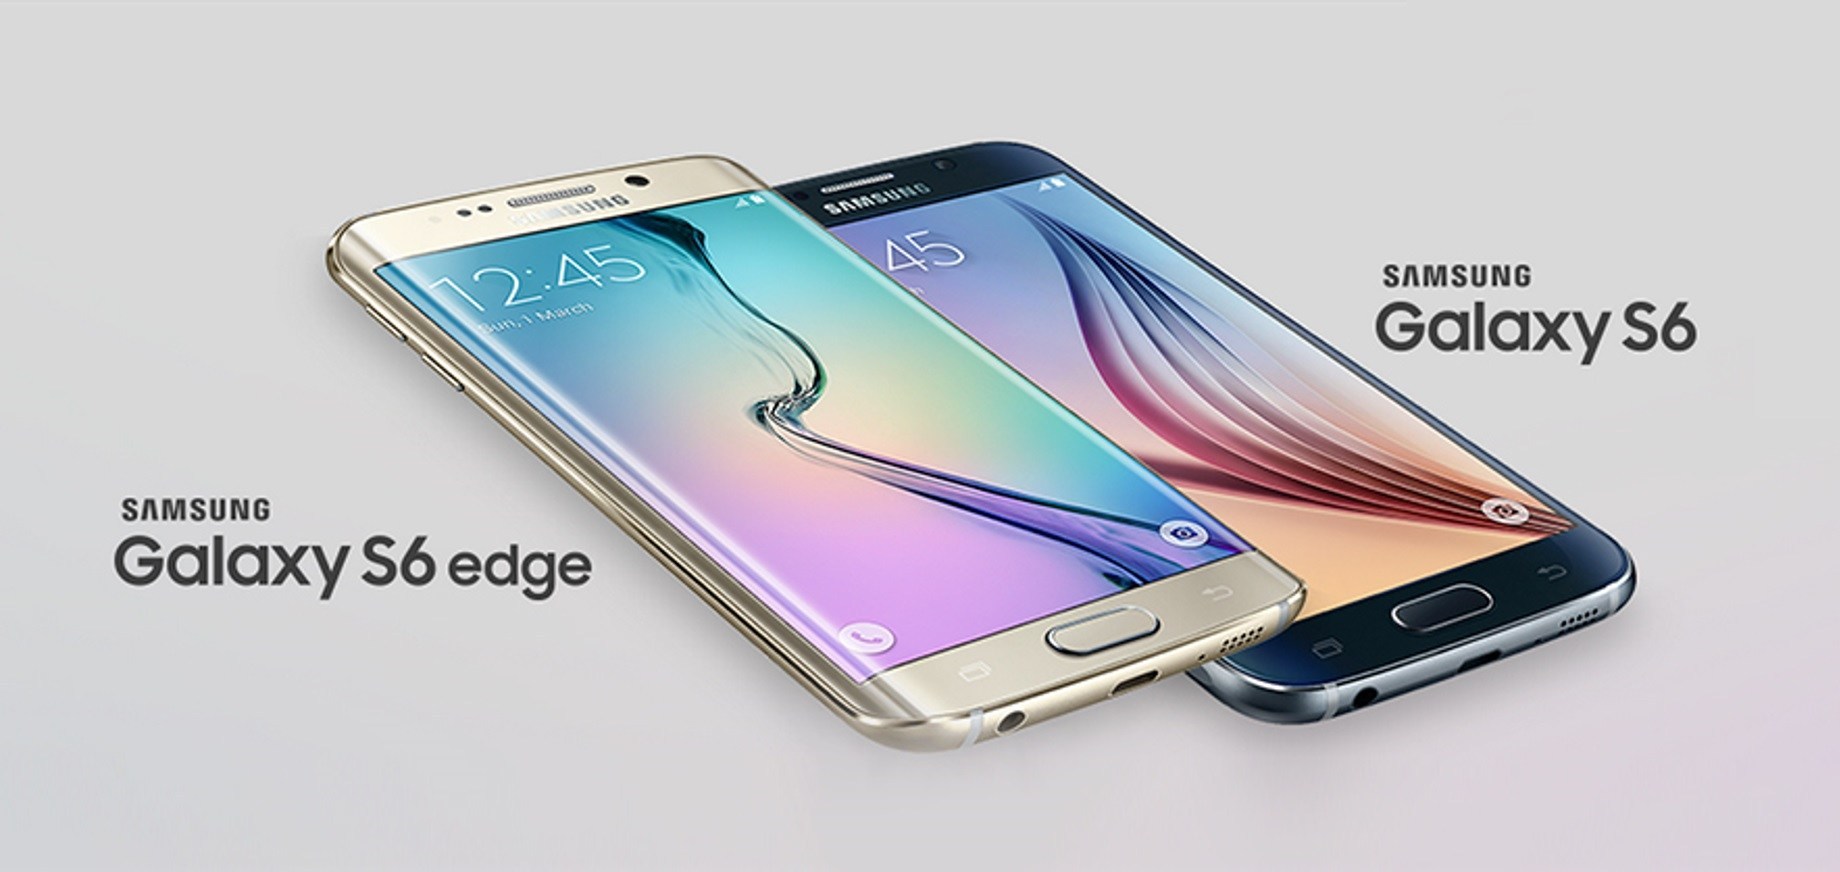 The Samsung Galaxy S6 and S6 Edge have officially reached the end of their update cycle from Samsung